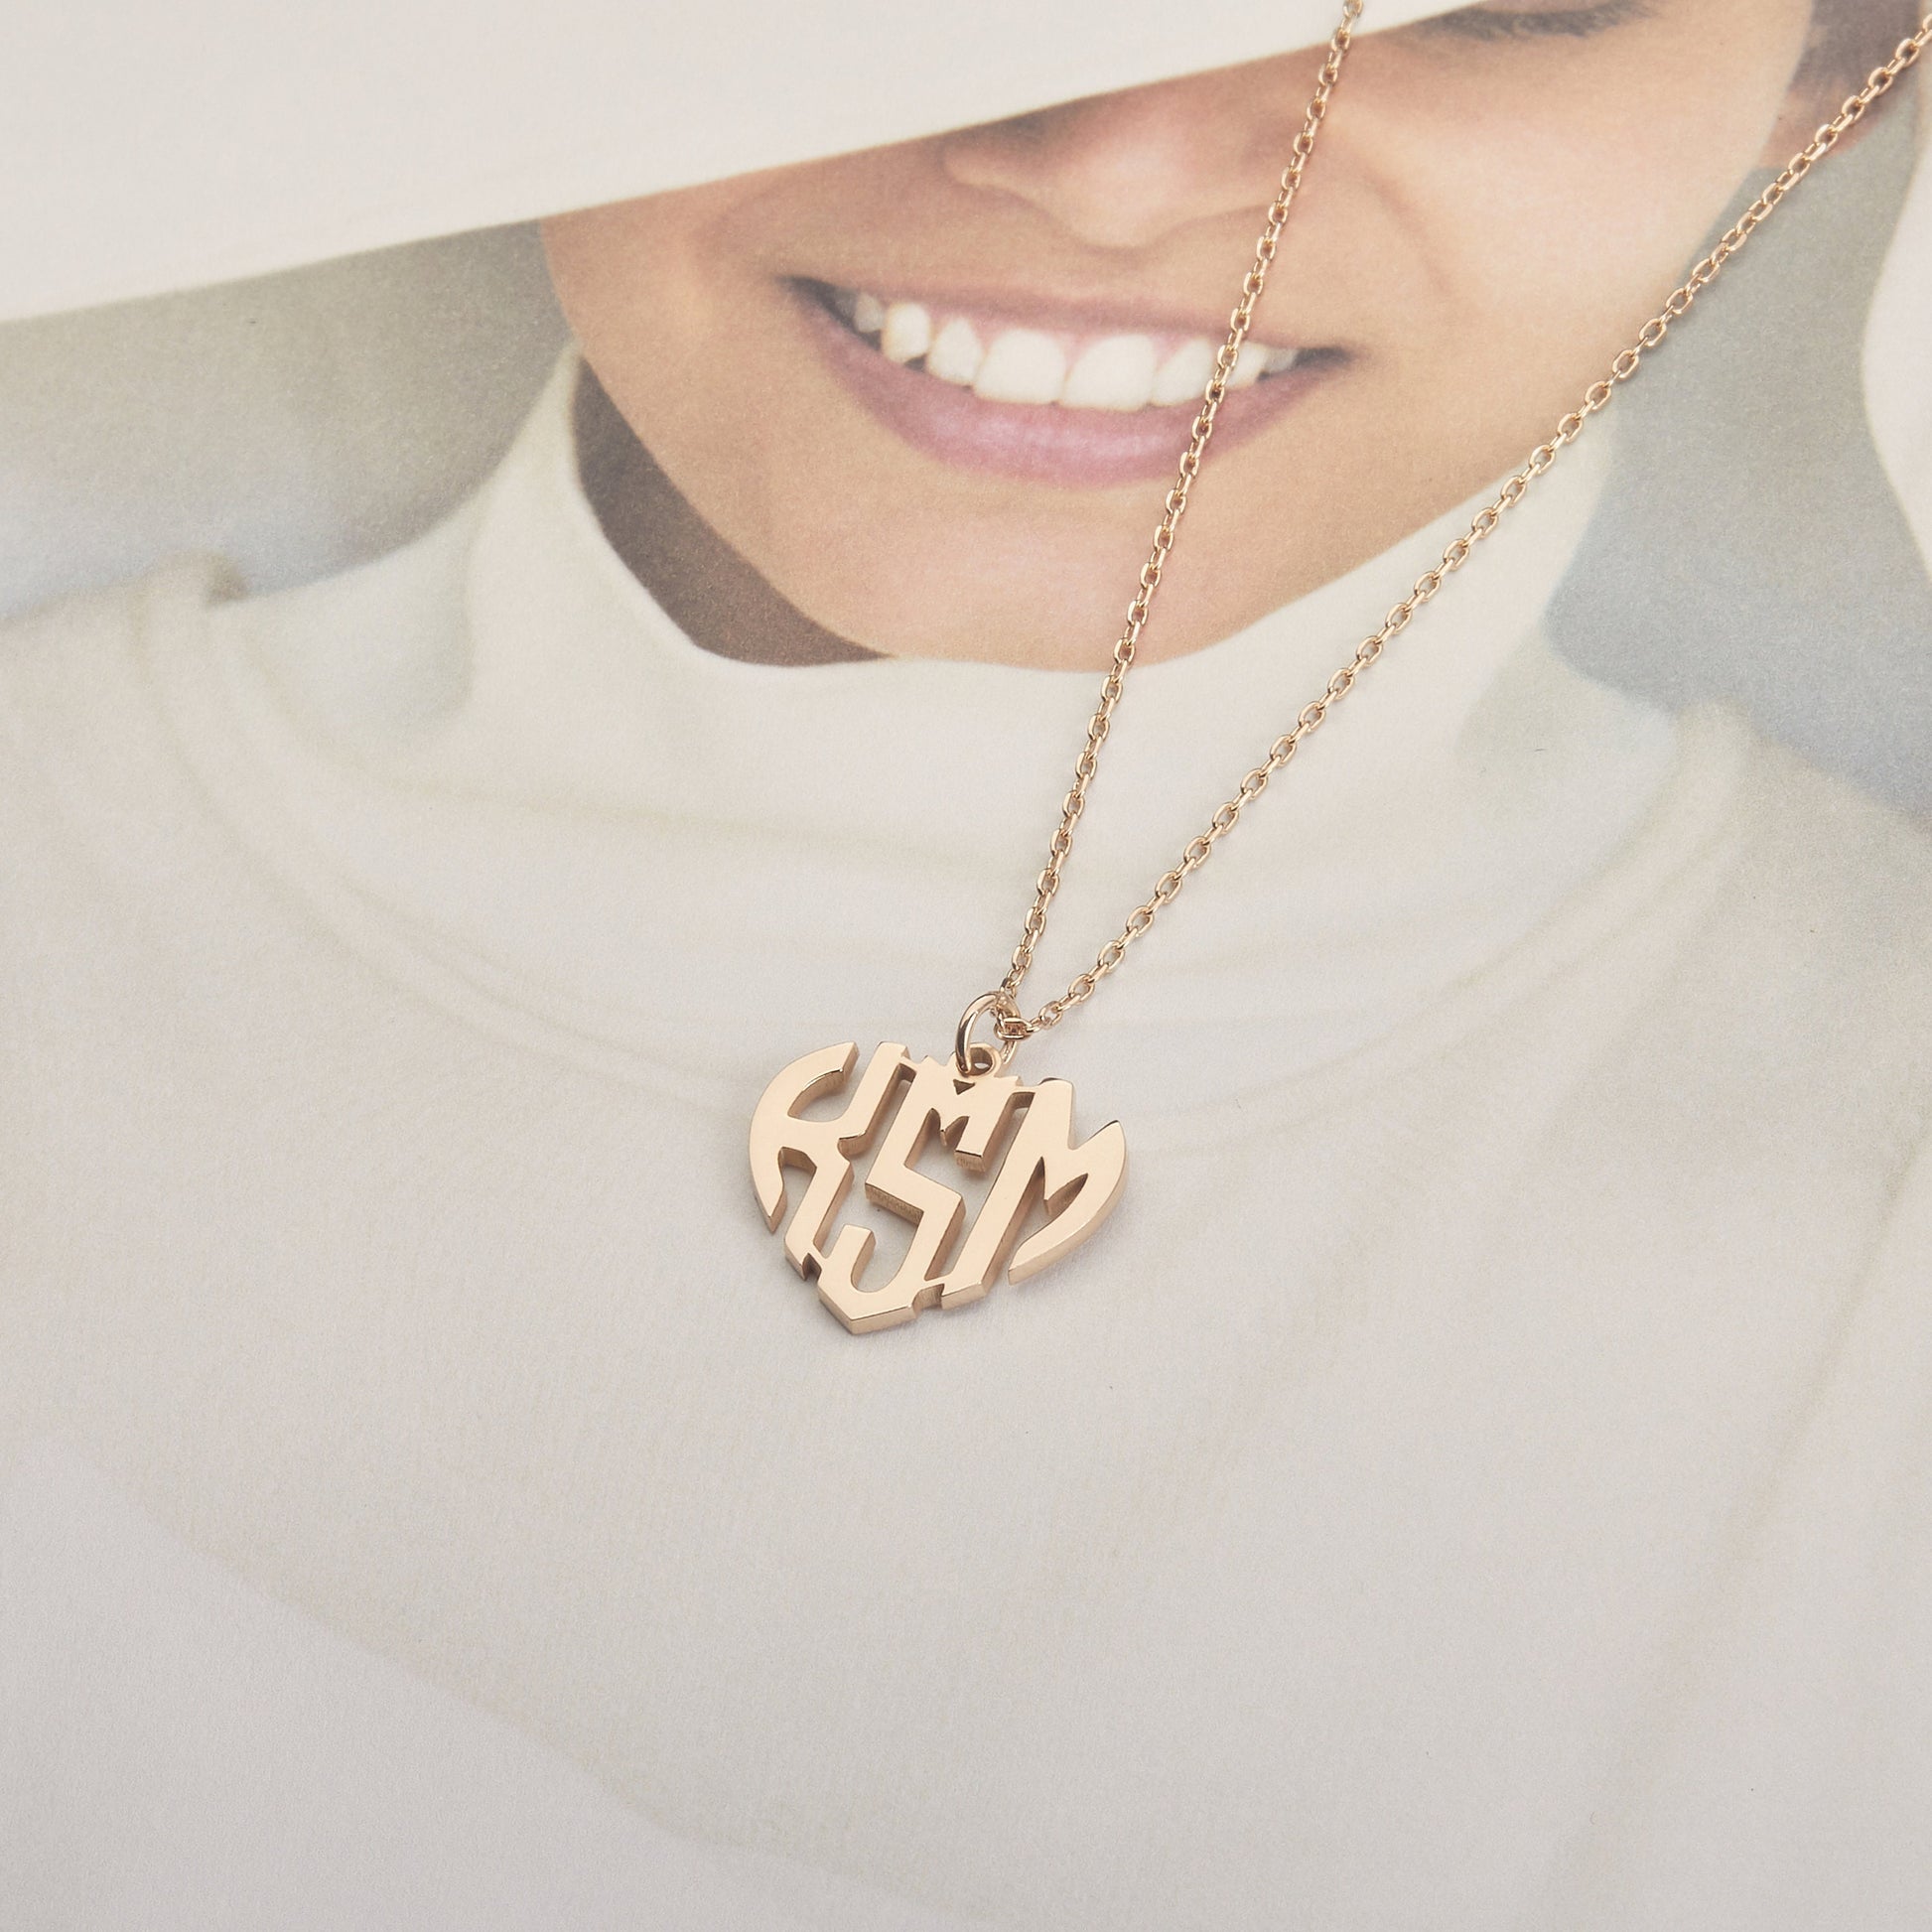 Custom Monogram Necklace | Name Initials Necklace | Children Name Necklace | Monogrammed Gifts | Monogrammed Heart Necklace | Gift for her